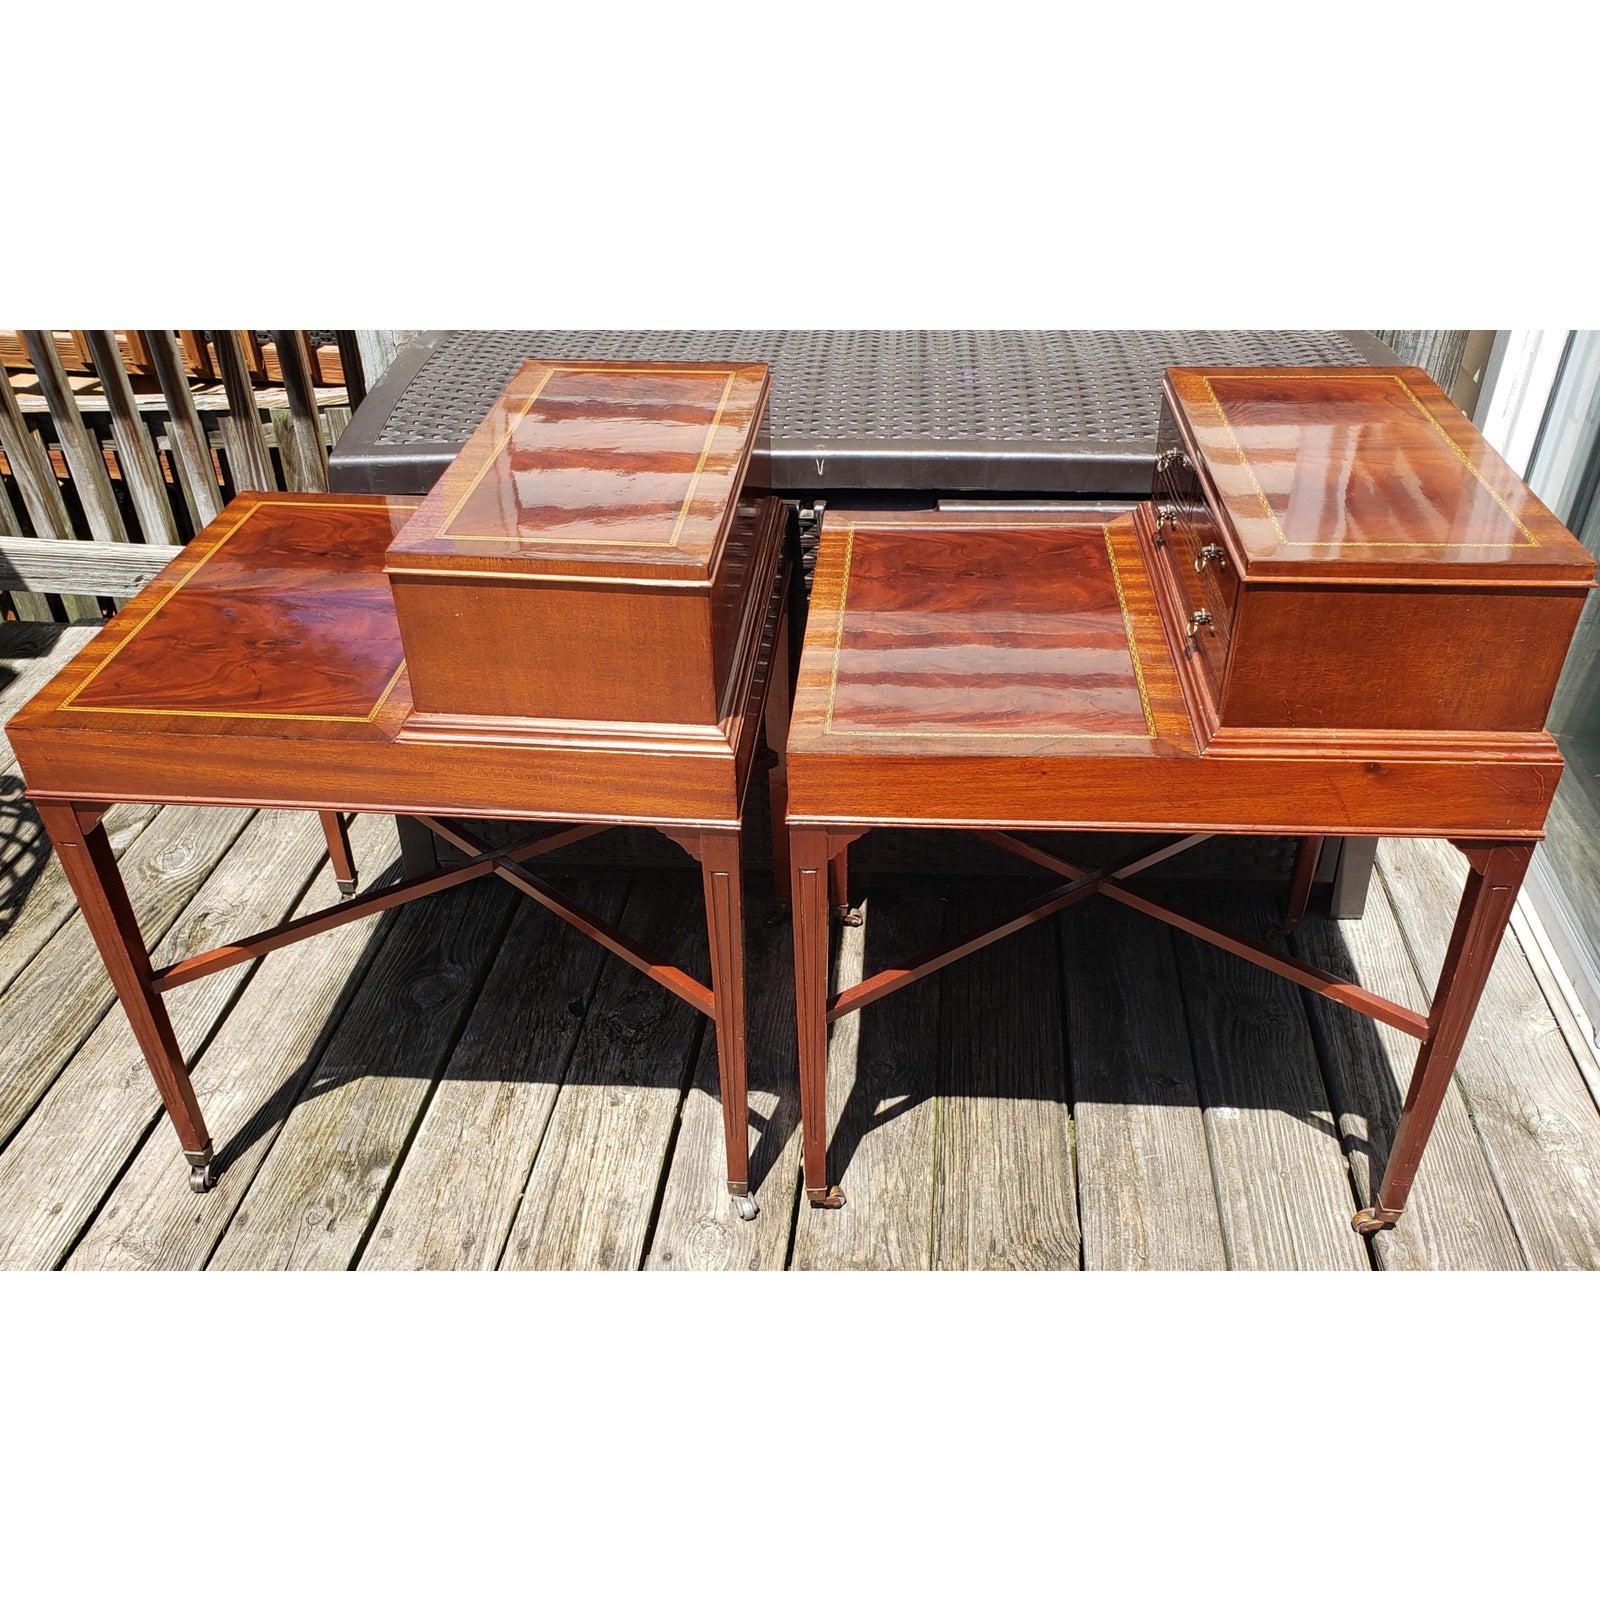 20th Century Antique Flame Mahogany Inlaid Satinwood Banded 2 Tier Side Tables, a Pair